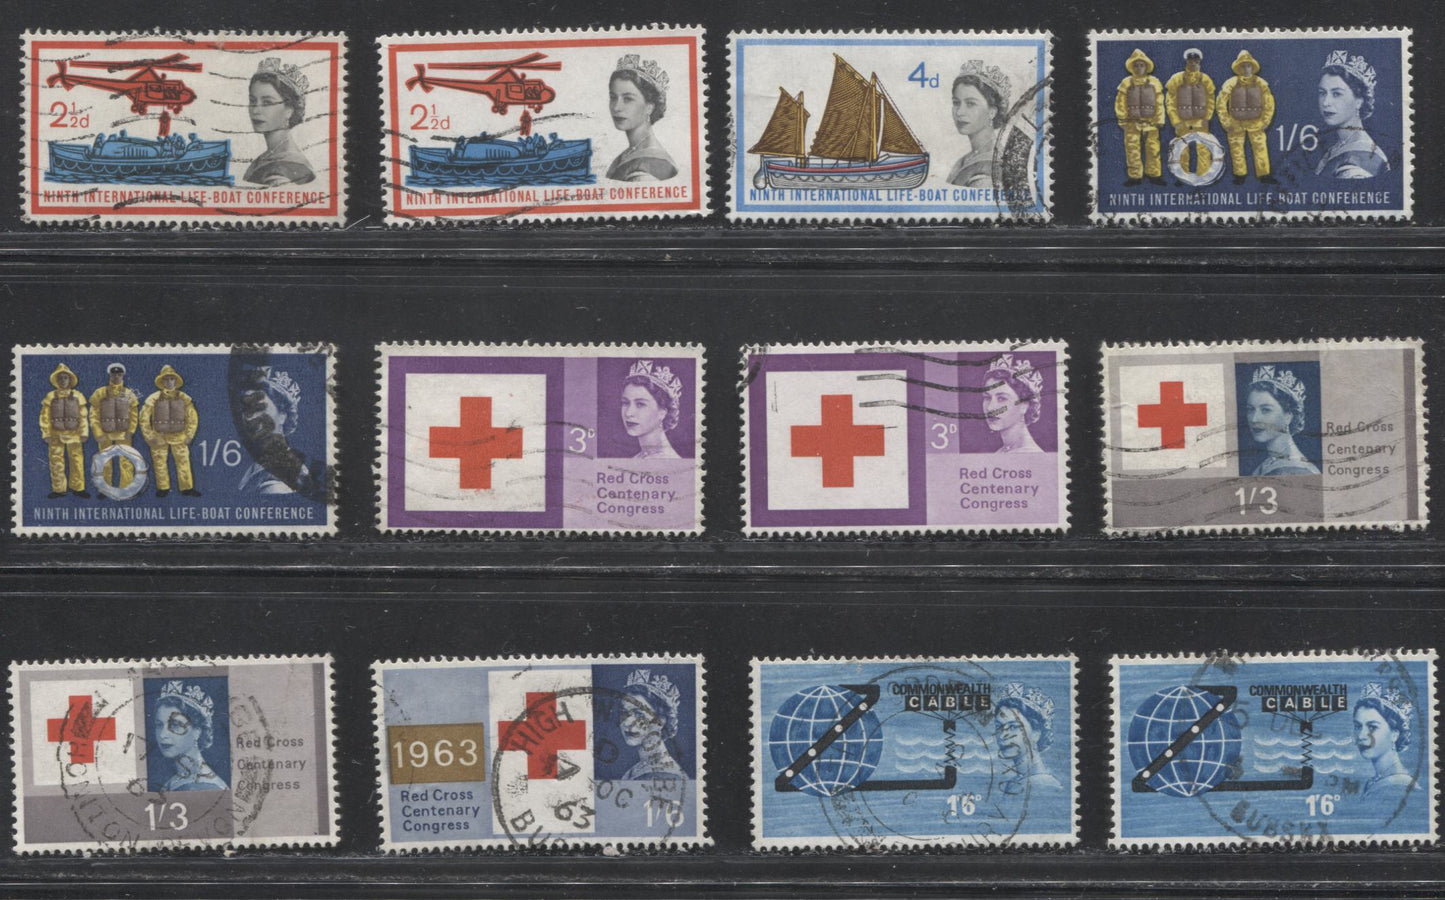 Great Britain #387-401 (SG631-645) 1962-1963 Commemoratives, A Specialized Mostly Very Fine Used Lot of 29 Stamps, Many Shade and Fluorescent Paper Varieties